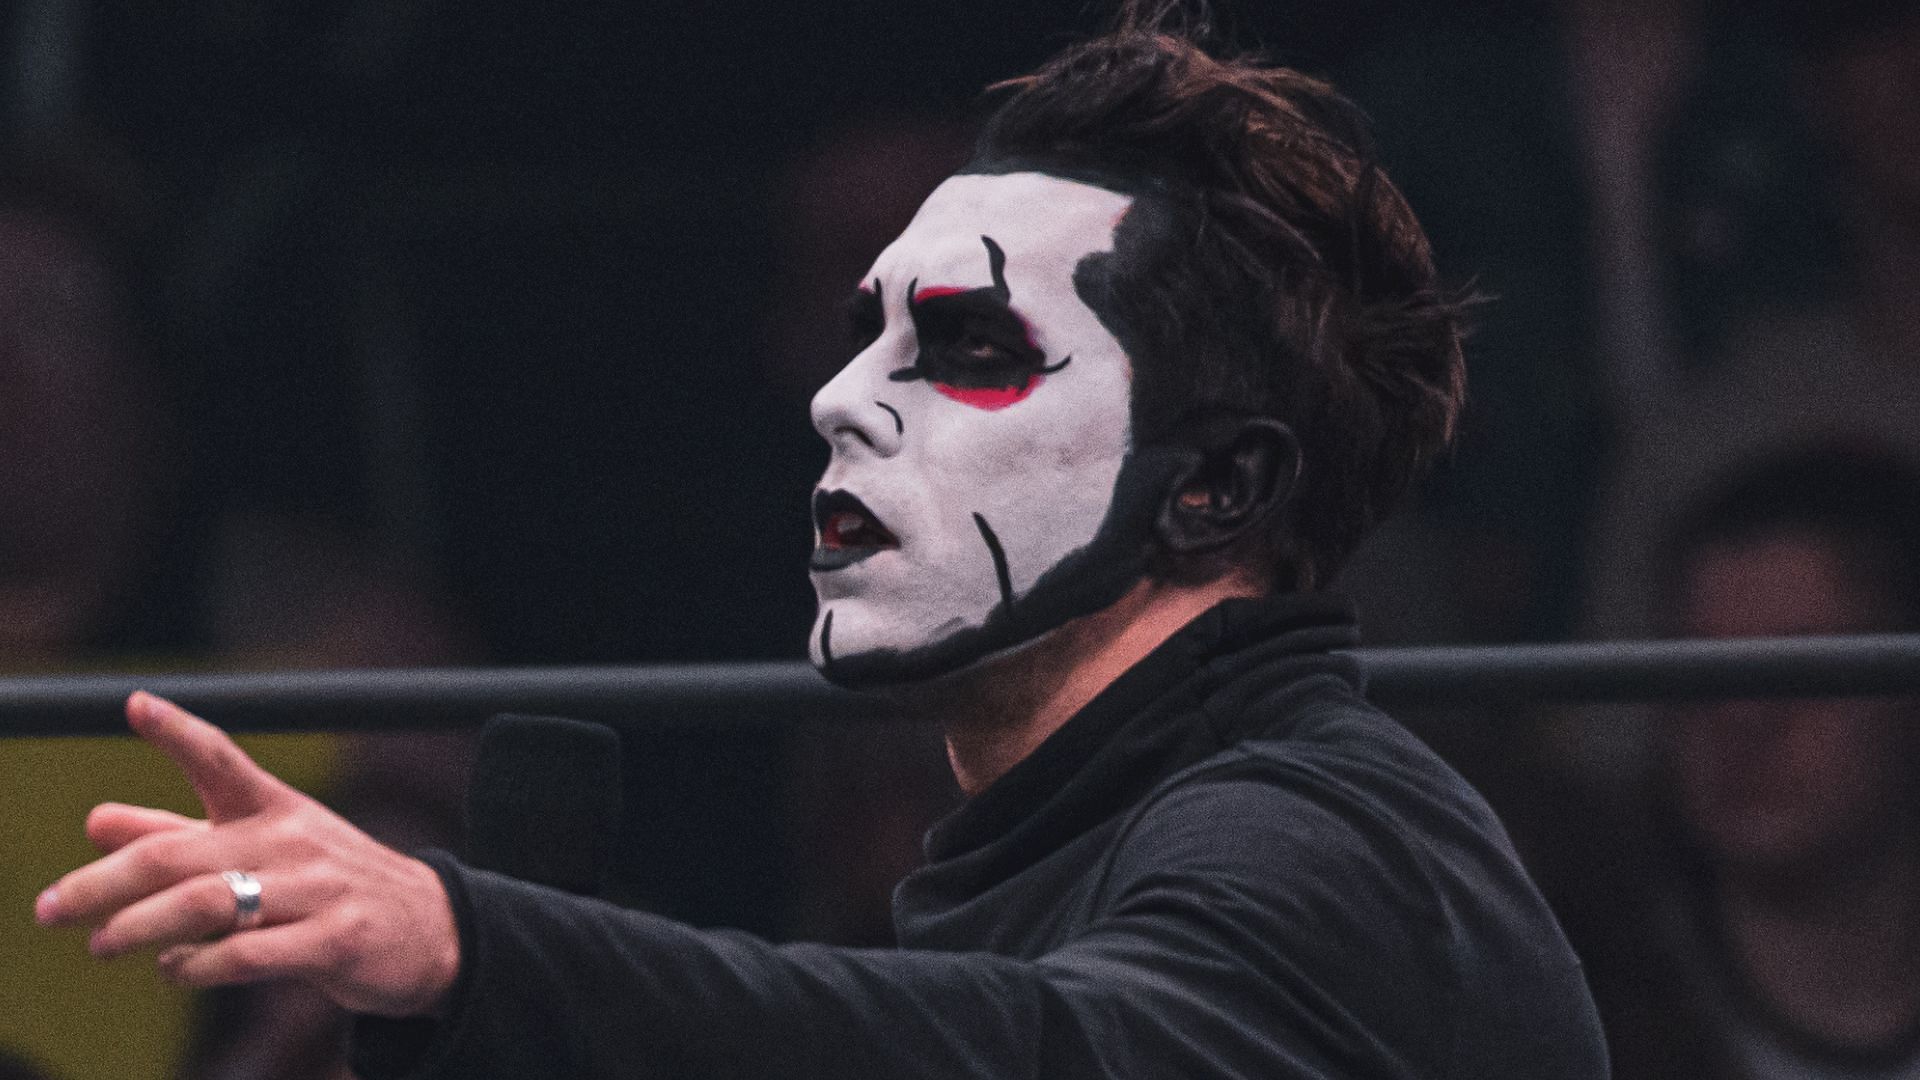 Danhausen at an AEW Dynamite event in 2022 (credit: Jay Lee Photography)